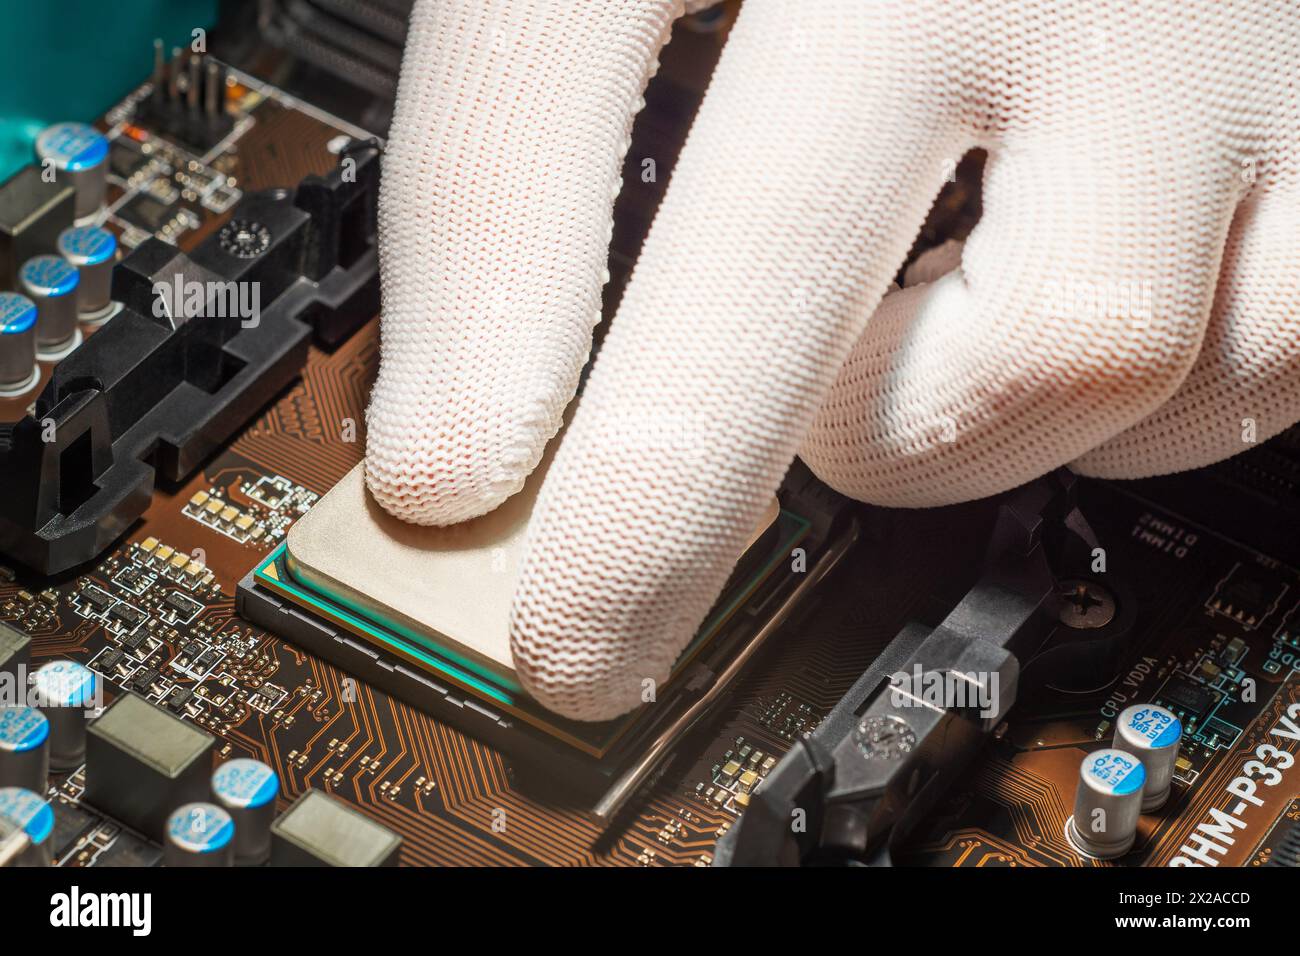 Man hand in white antistatic gloves installing computer processor Stock Photo